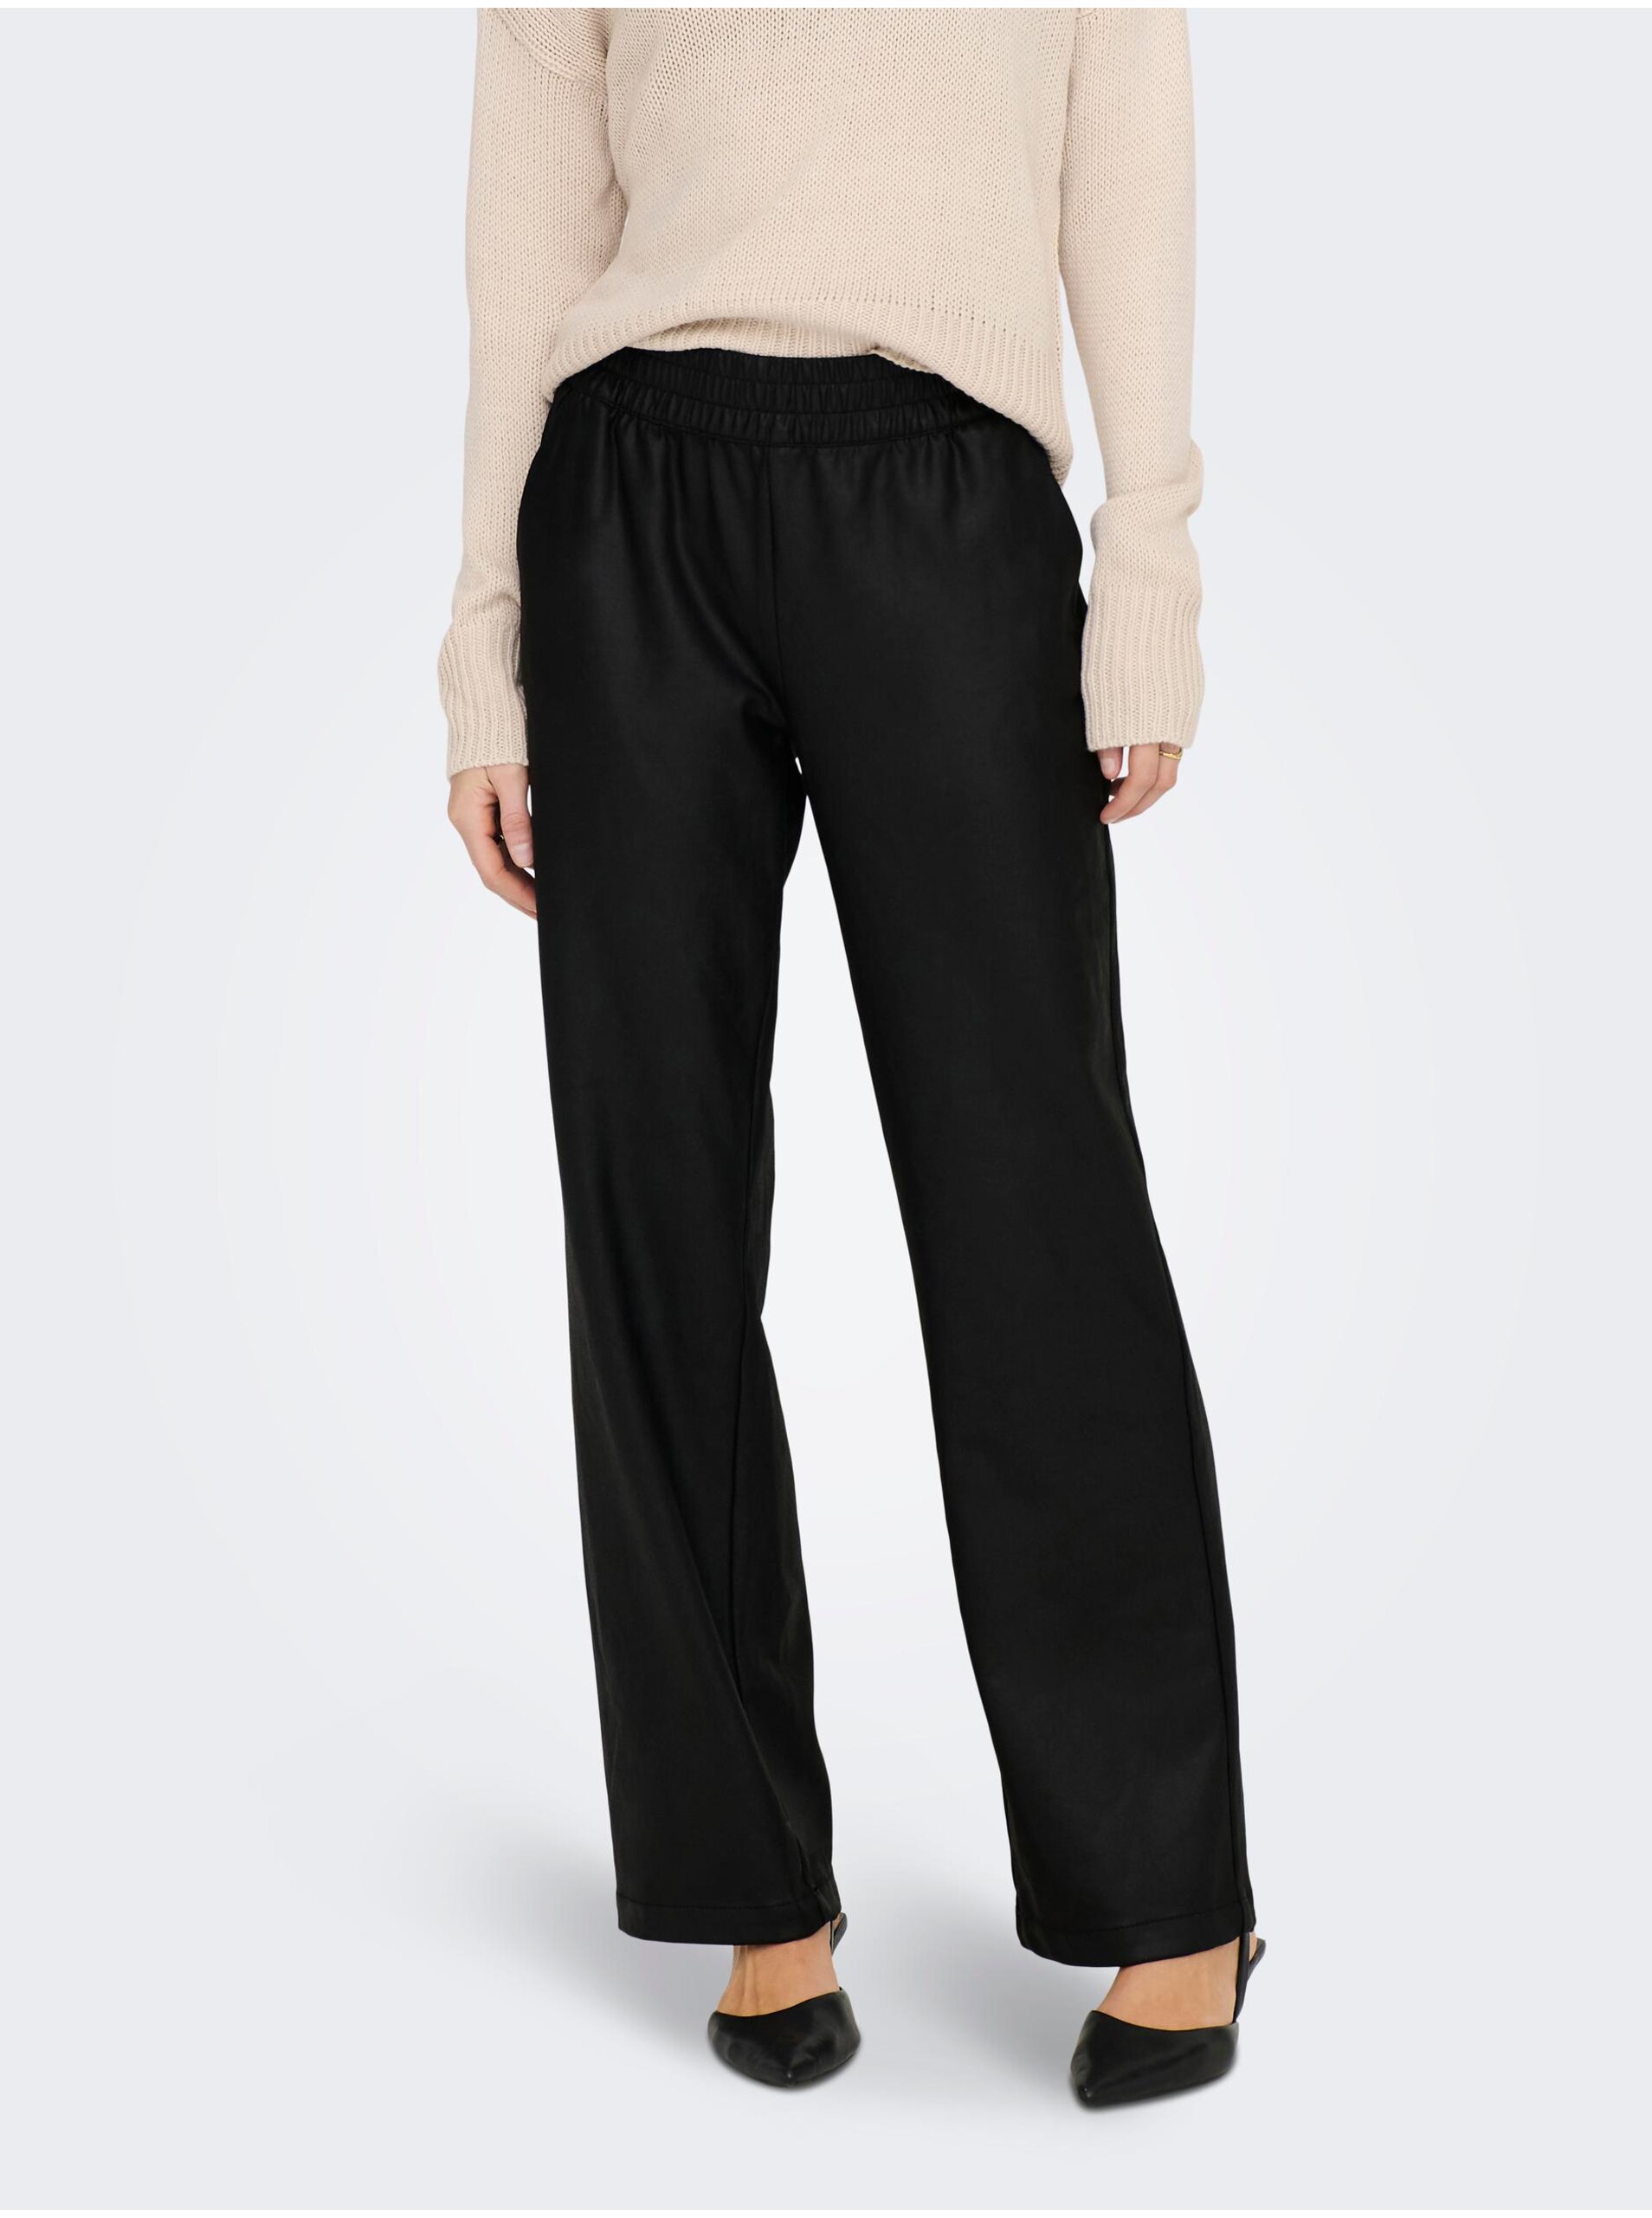 Black Women's Leatherette Trousers ONLY Pop Star - Ladies